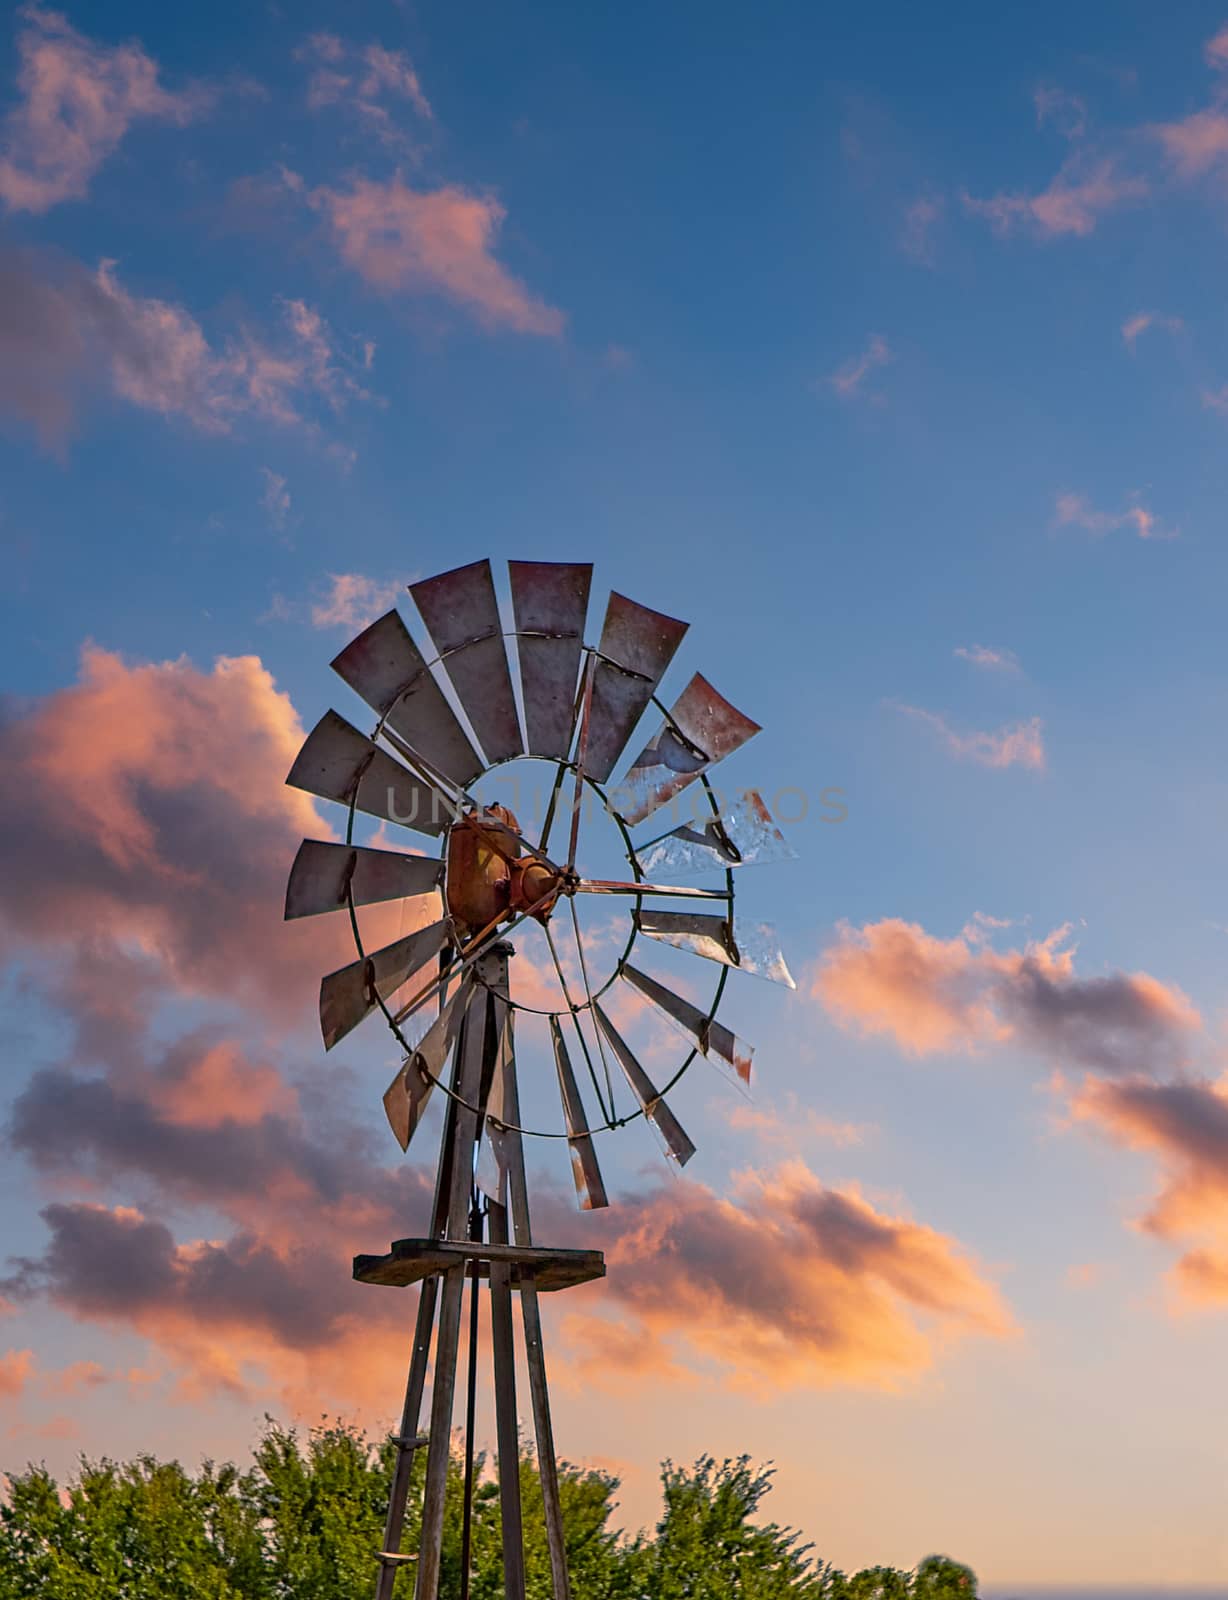 Old Wind Mill at Sunset by dbvirago